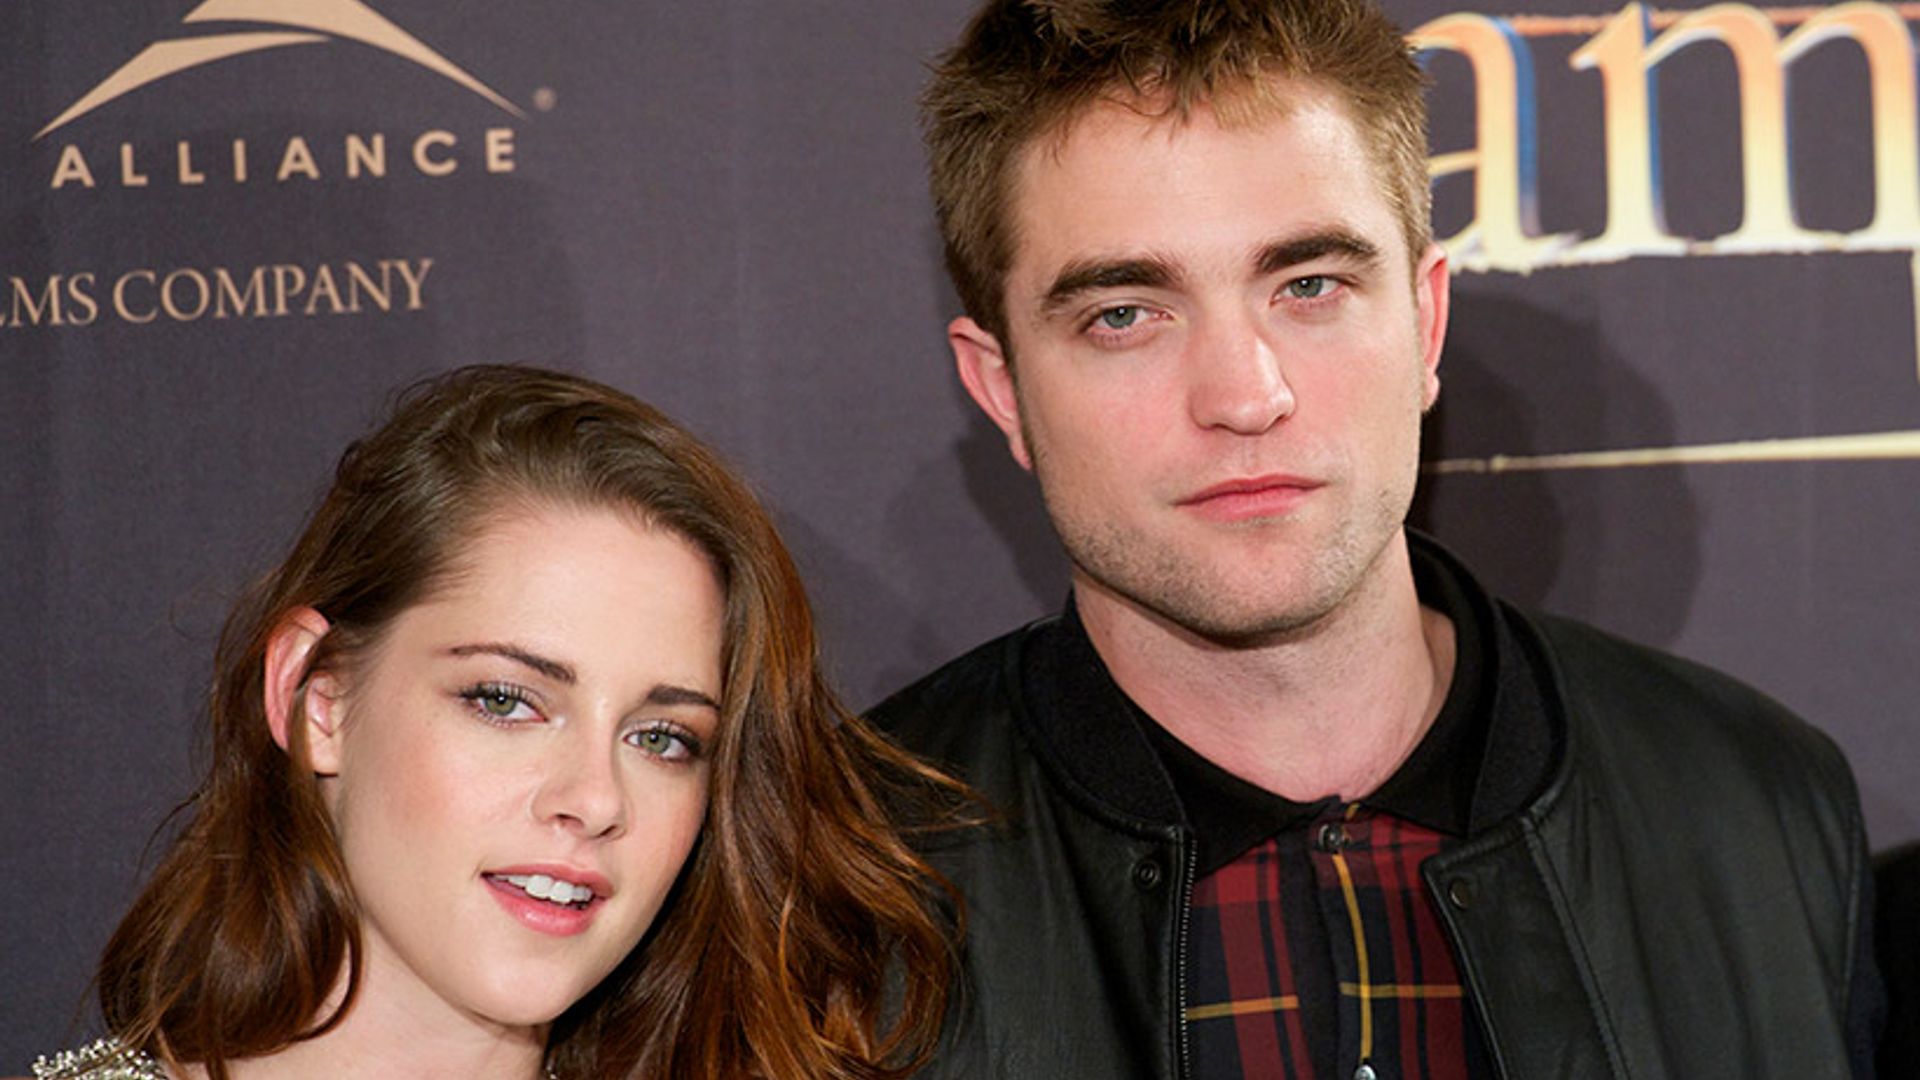 Robert Pattinson and Kristen Stewart spotted together – is a reunion on the cards?